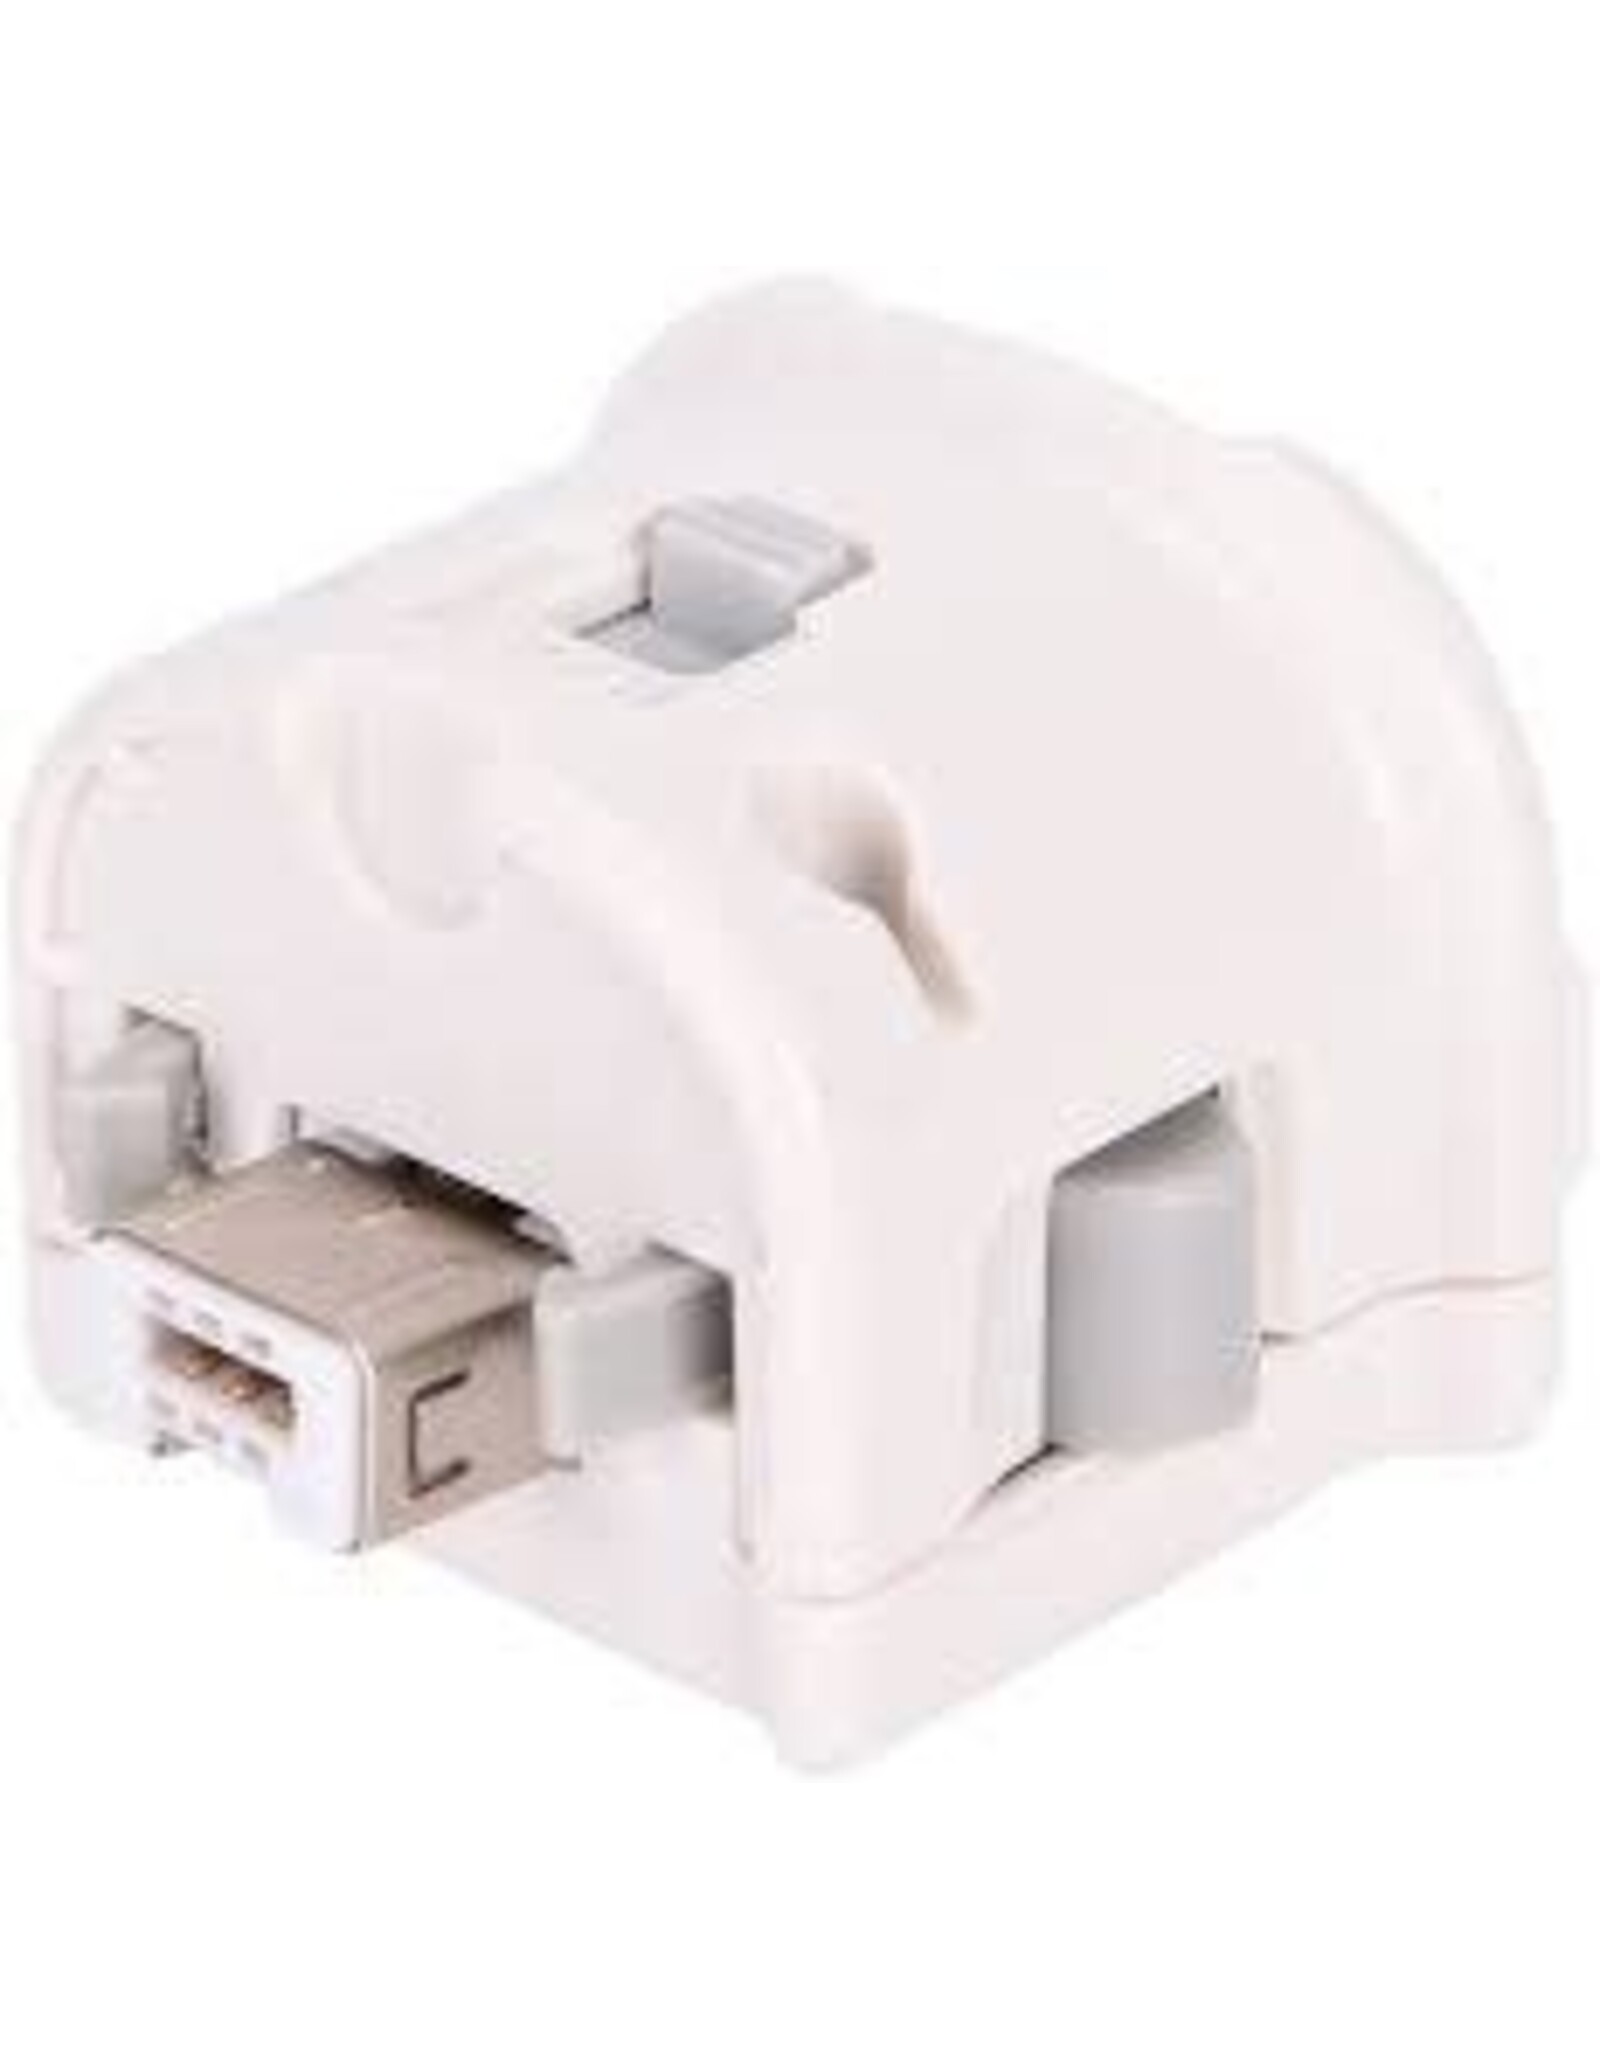 Wii Wii MotionPlus Adapter - White (Used)